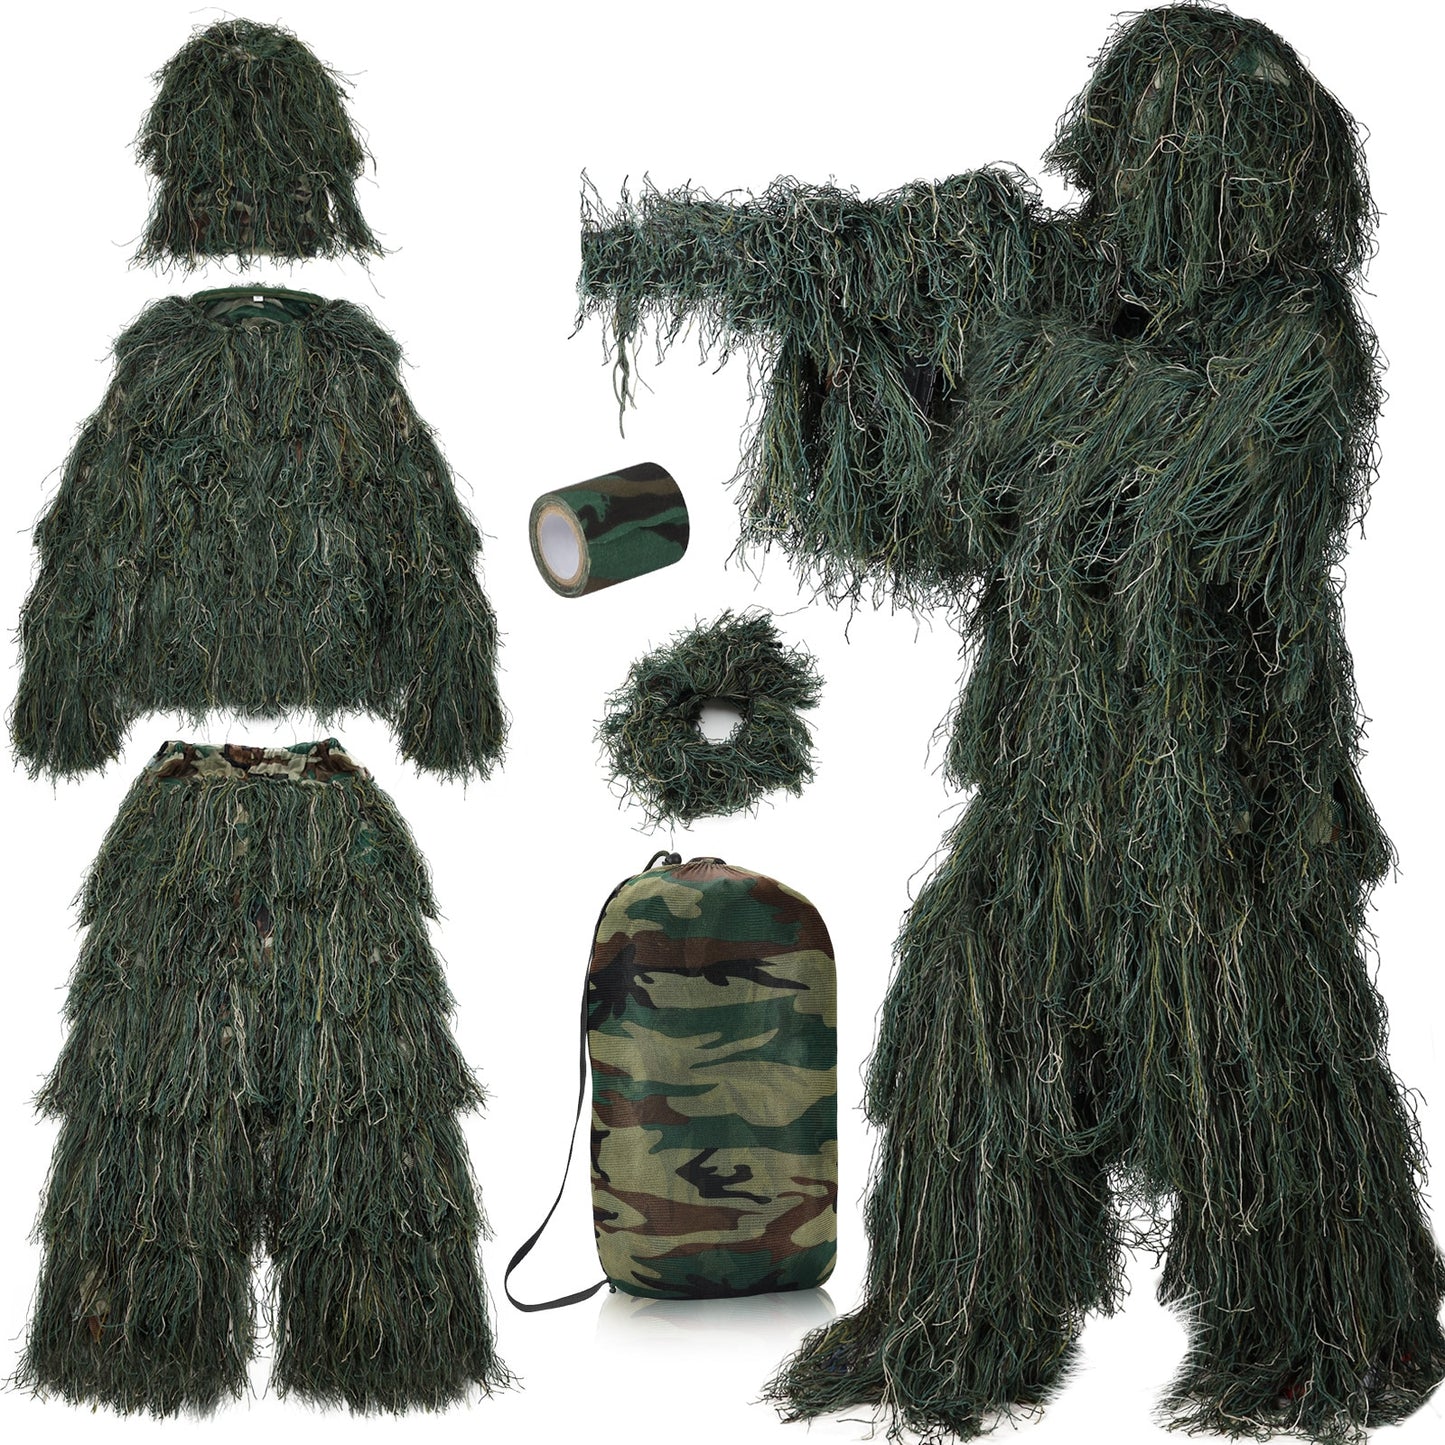 3D Withered Grass Ghillie Suits Sniper Military Tactical Camouflage Clothing Hunting Suits Army Airsoft Hunting Clothes Set Kits